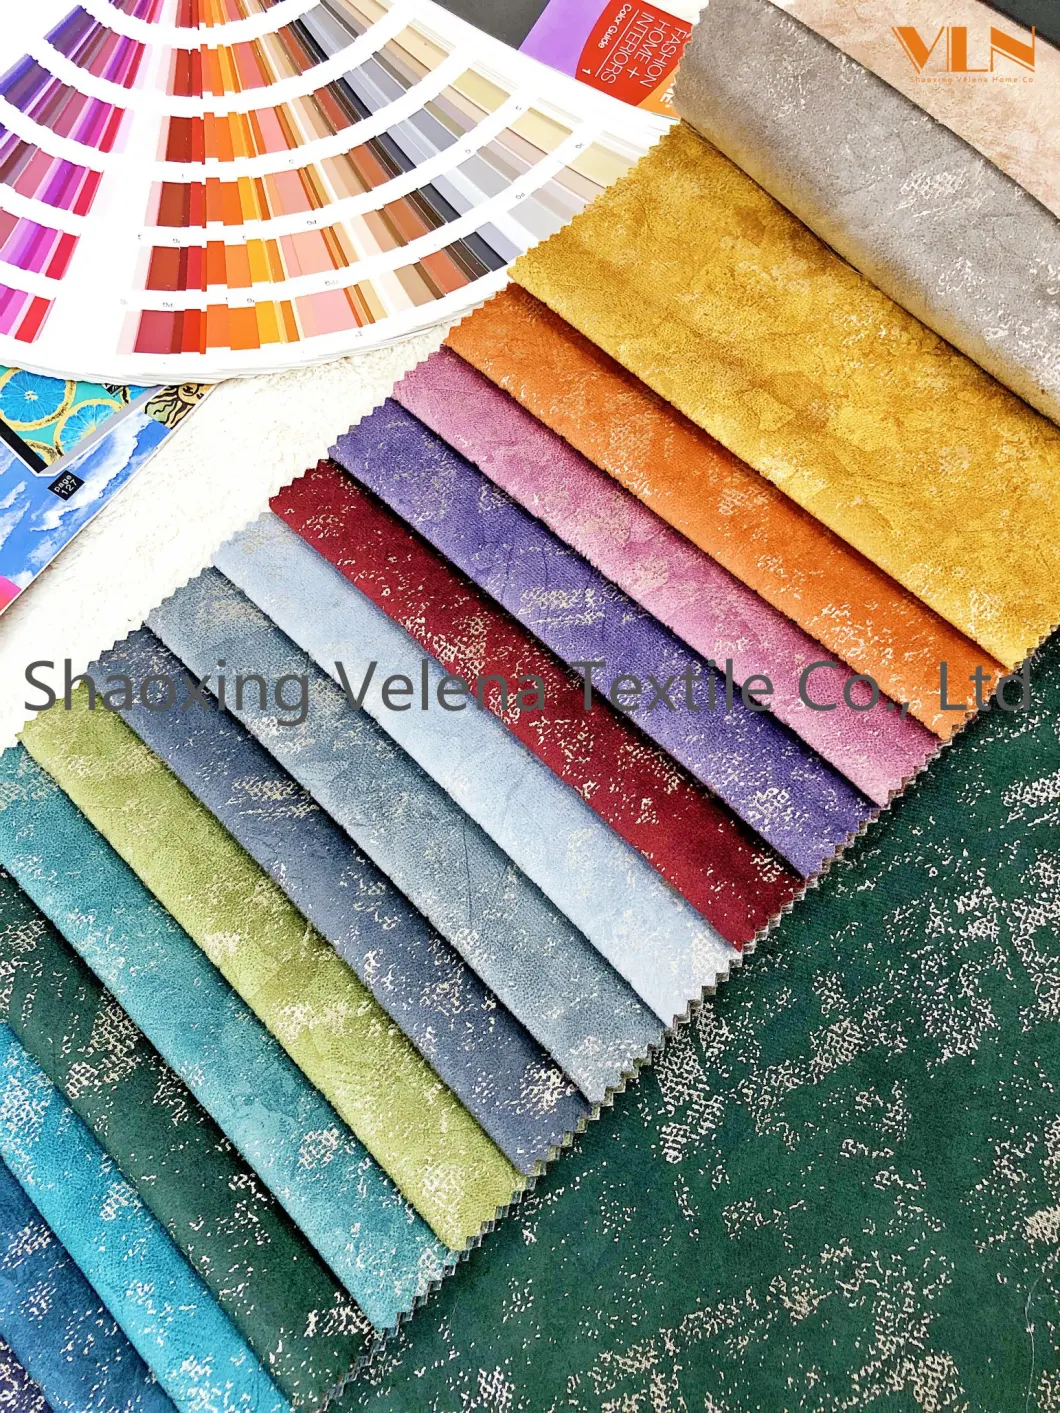 New Home Textile Soft Fabric Holland Velvet Dyeing with Print and Foil Upholstery Furniture Sofa Curtain Fabric China Factory 8